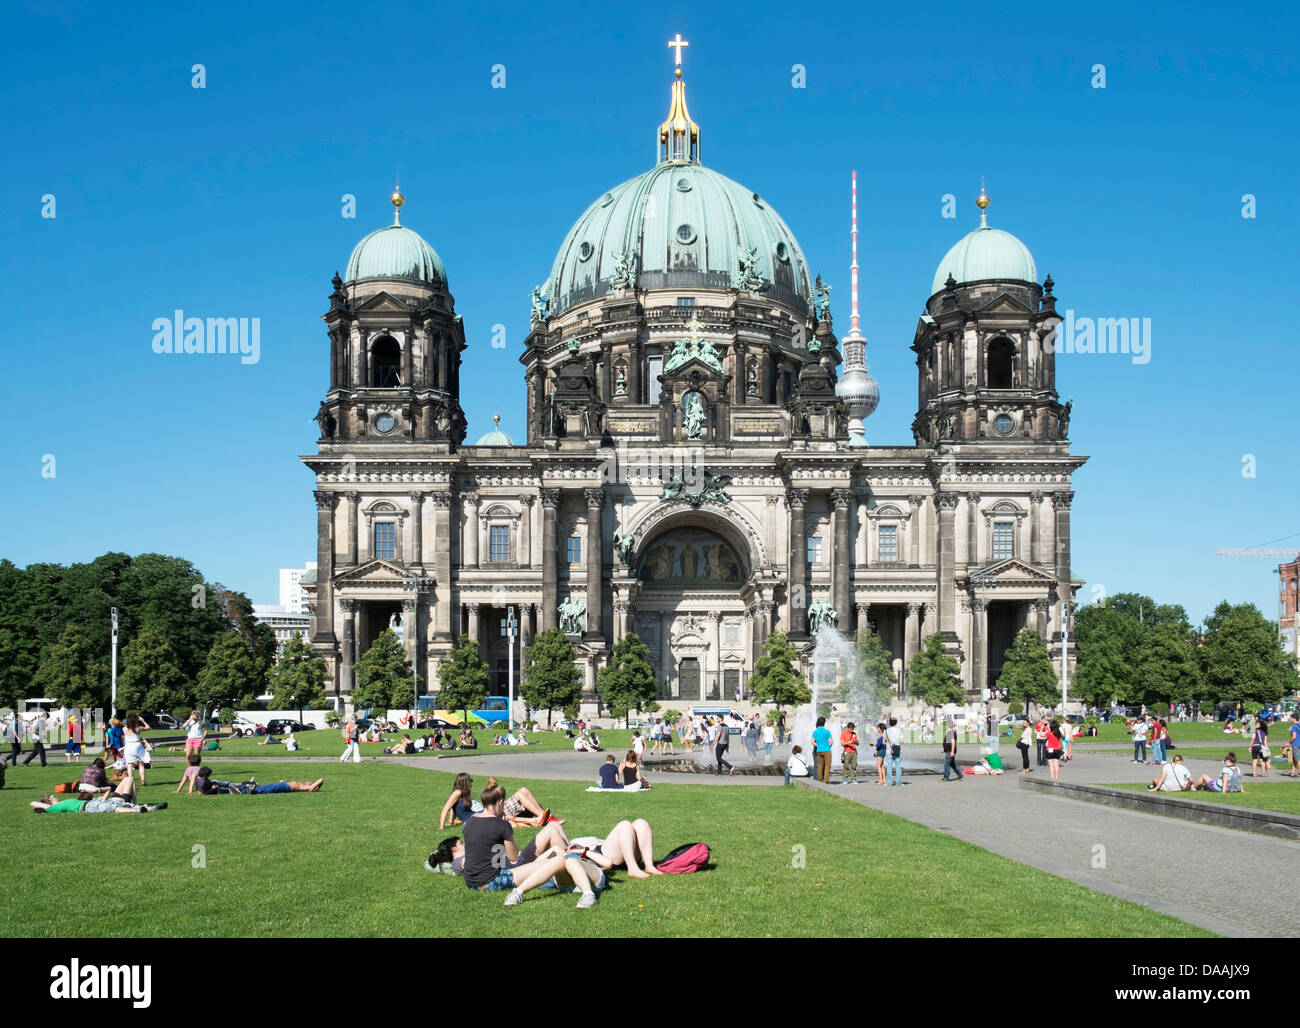 Busy Lustgarten in front of The Dom or Cathedral on Museumsinsel in Berlin Germany Stock Photo